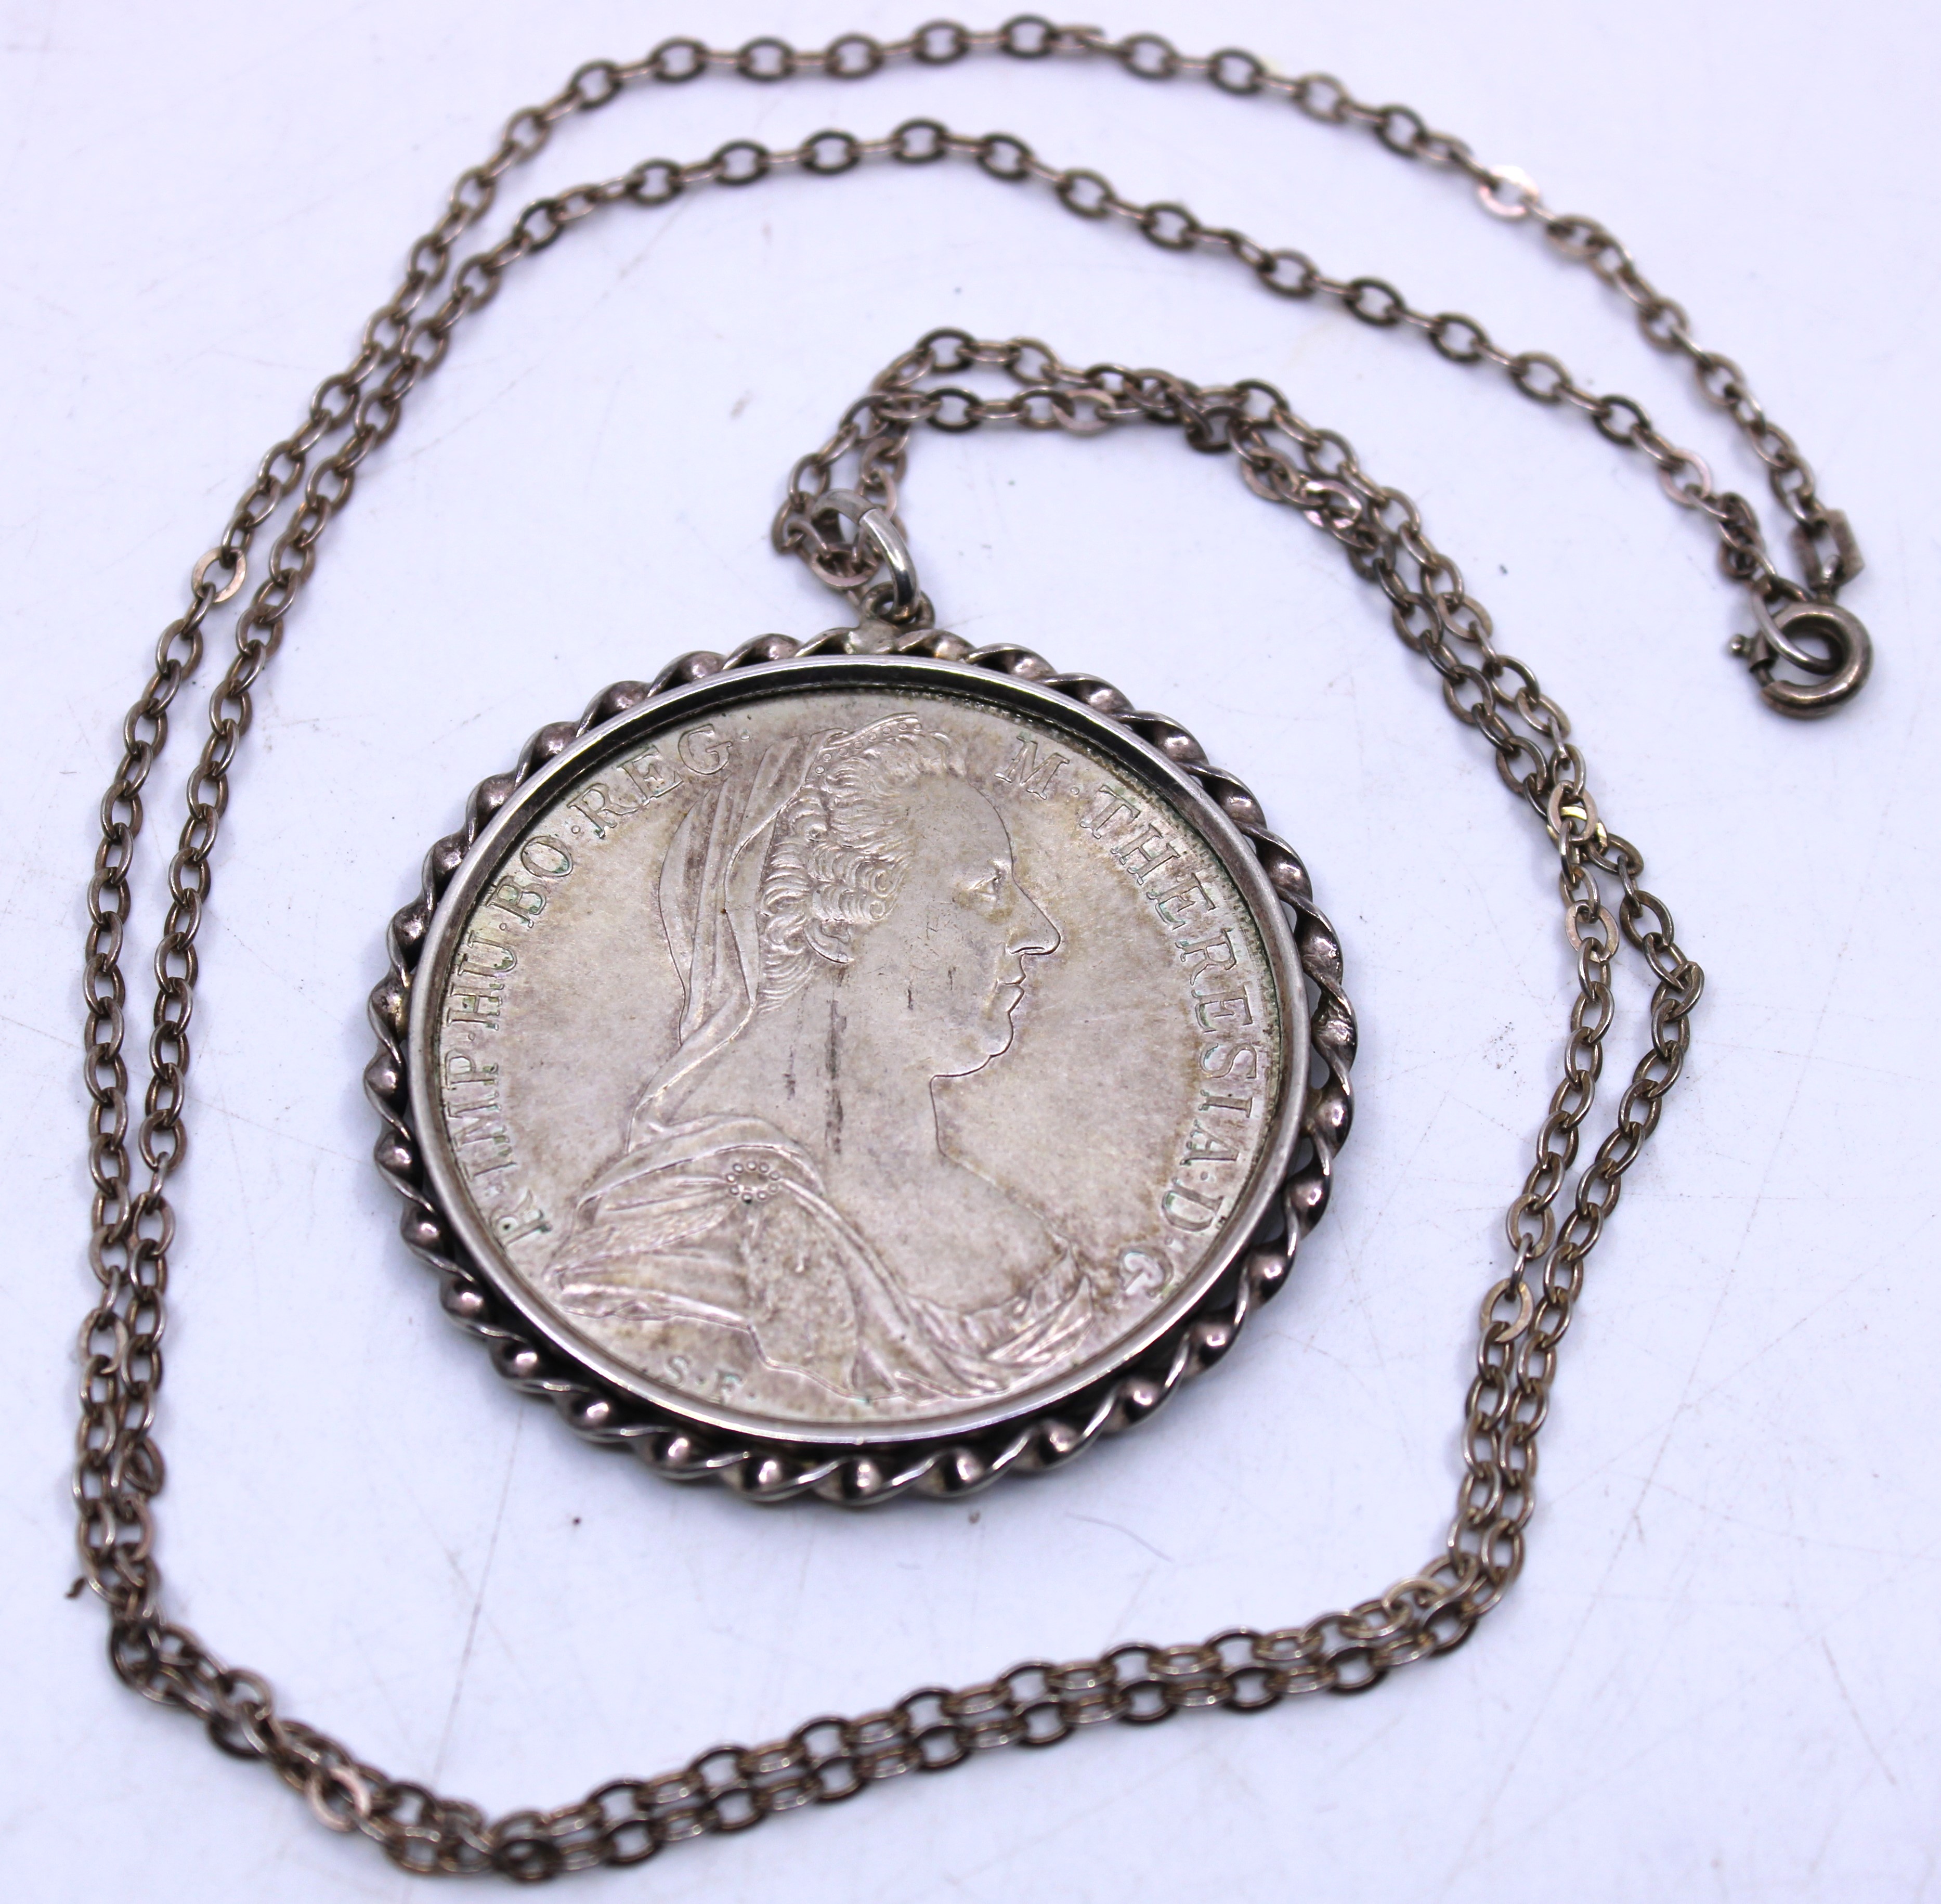 Maria Theresa 1780 Thaler Re-strike Coin Pendant on a Silver Chain.  An impressive size Coin Pendant